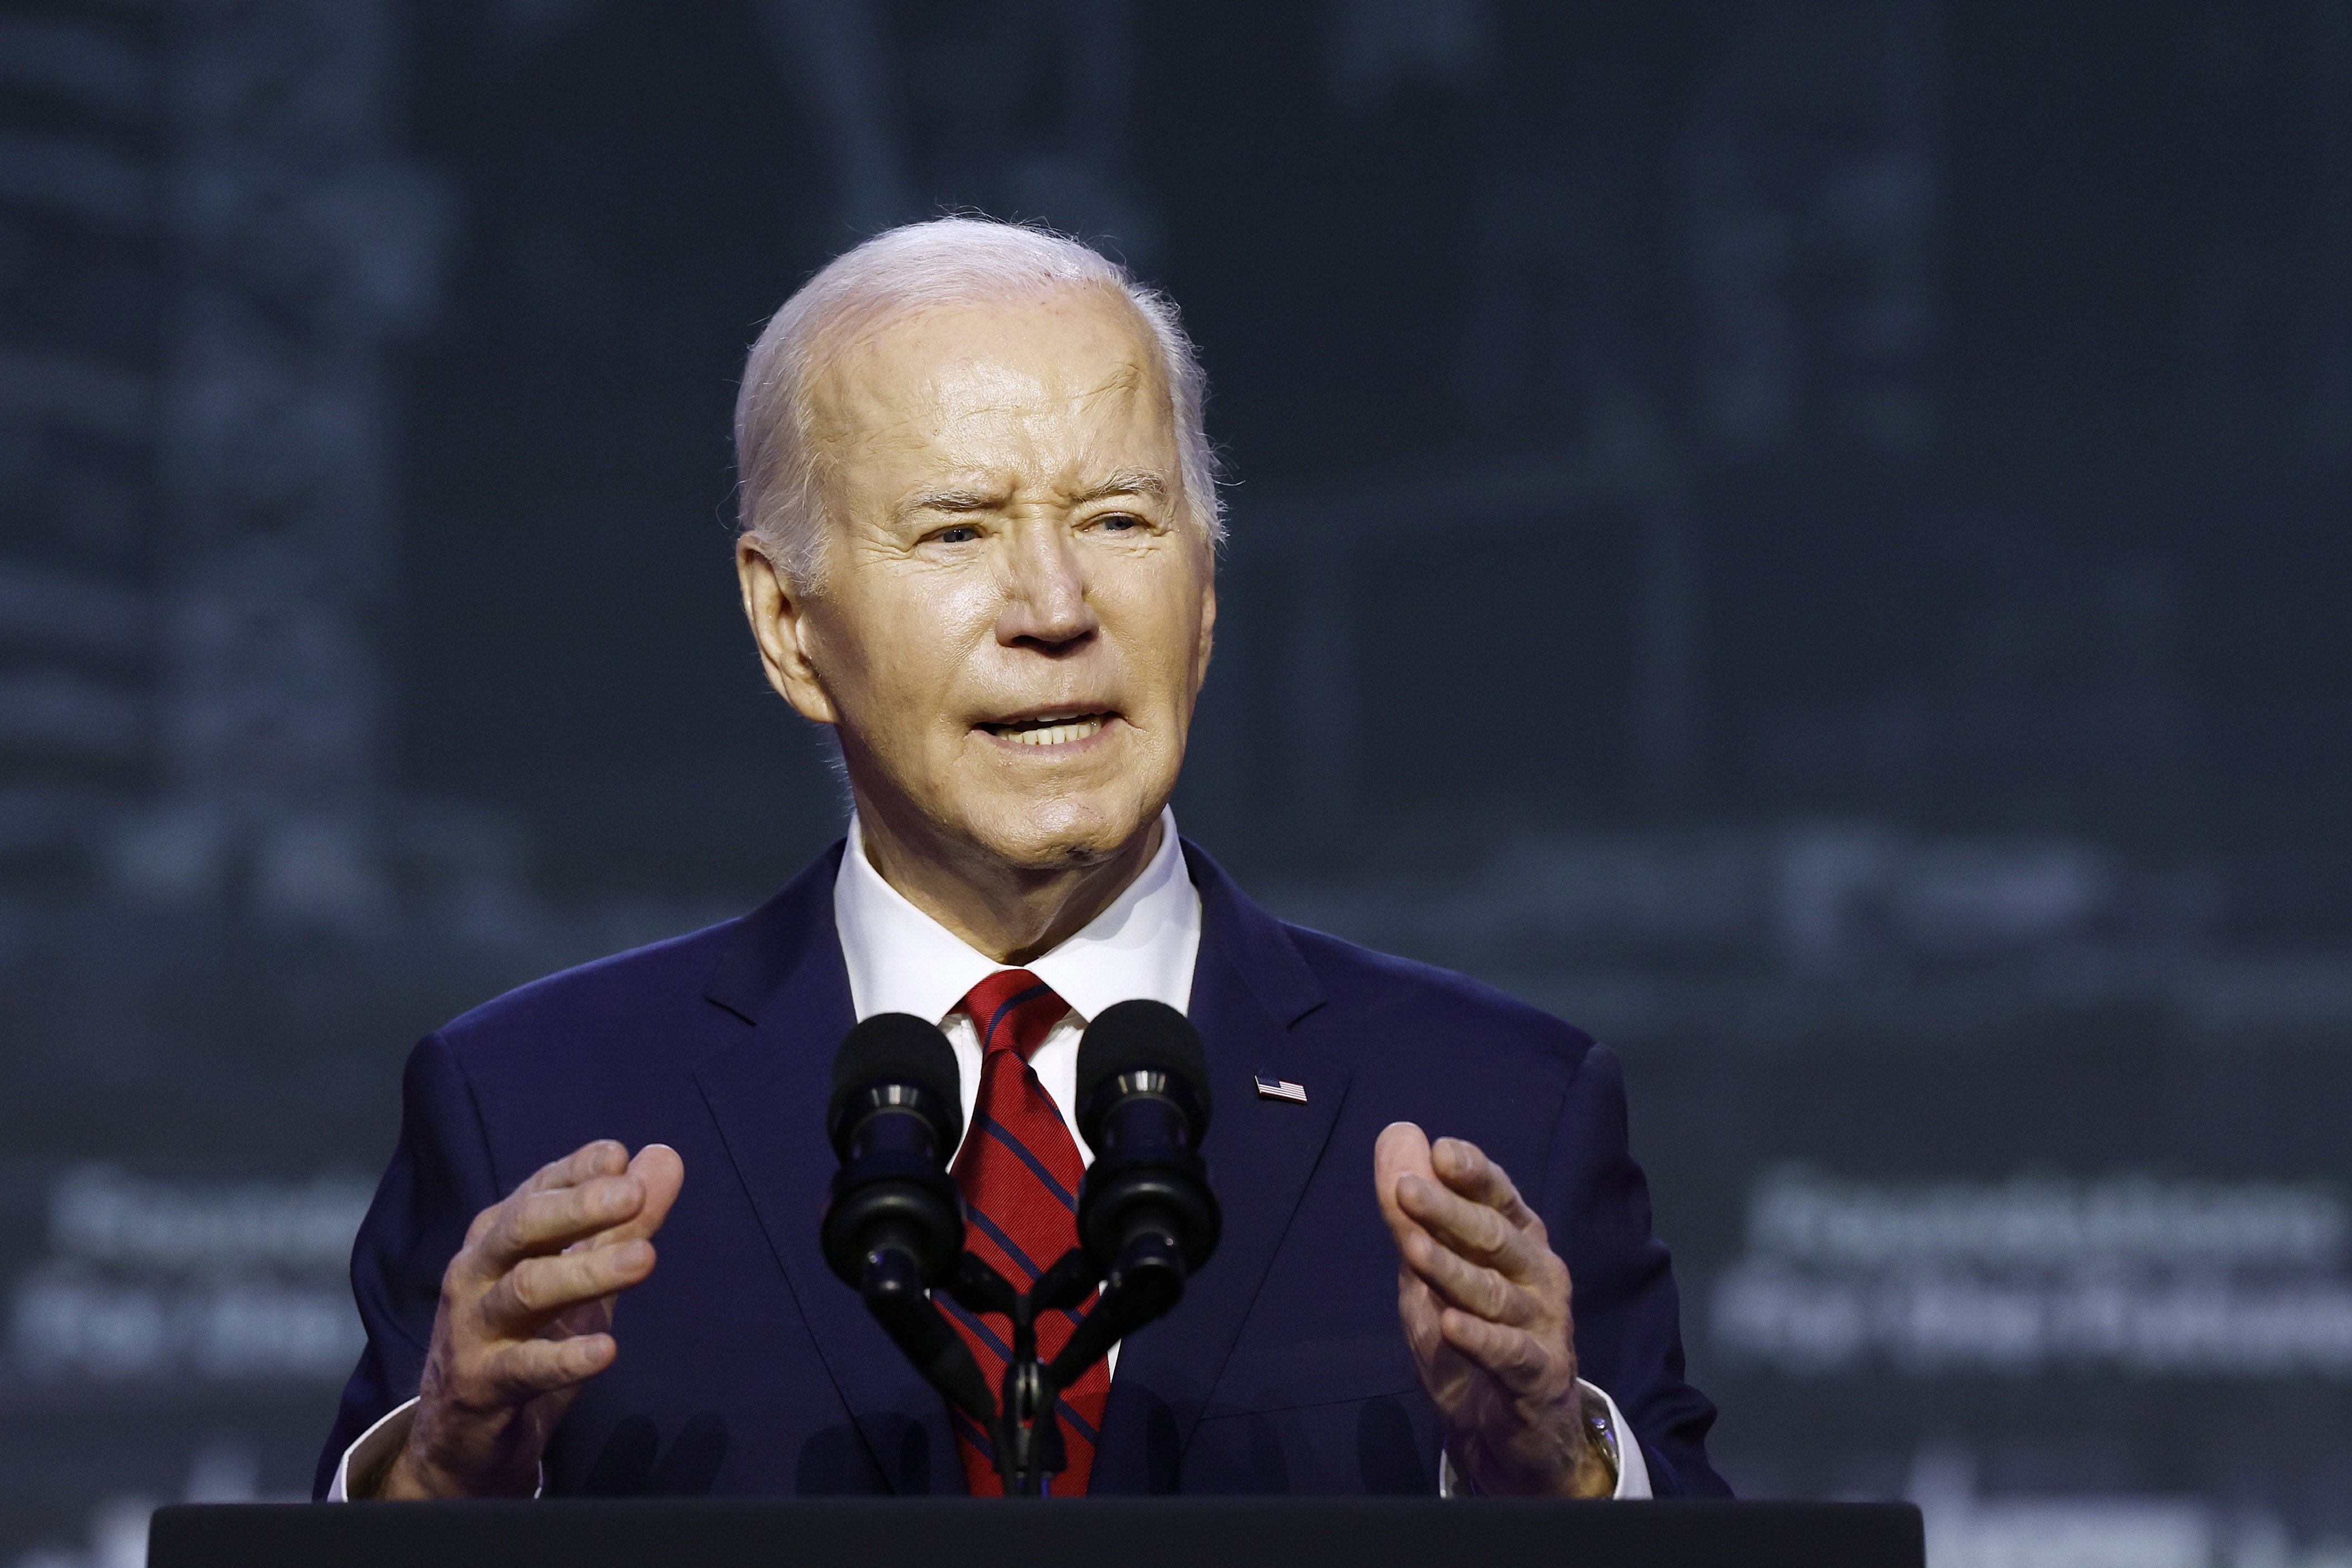 President Joe Biden standing behind a lectern in a navy suit and red tie. 